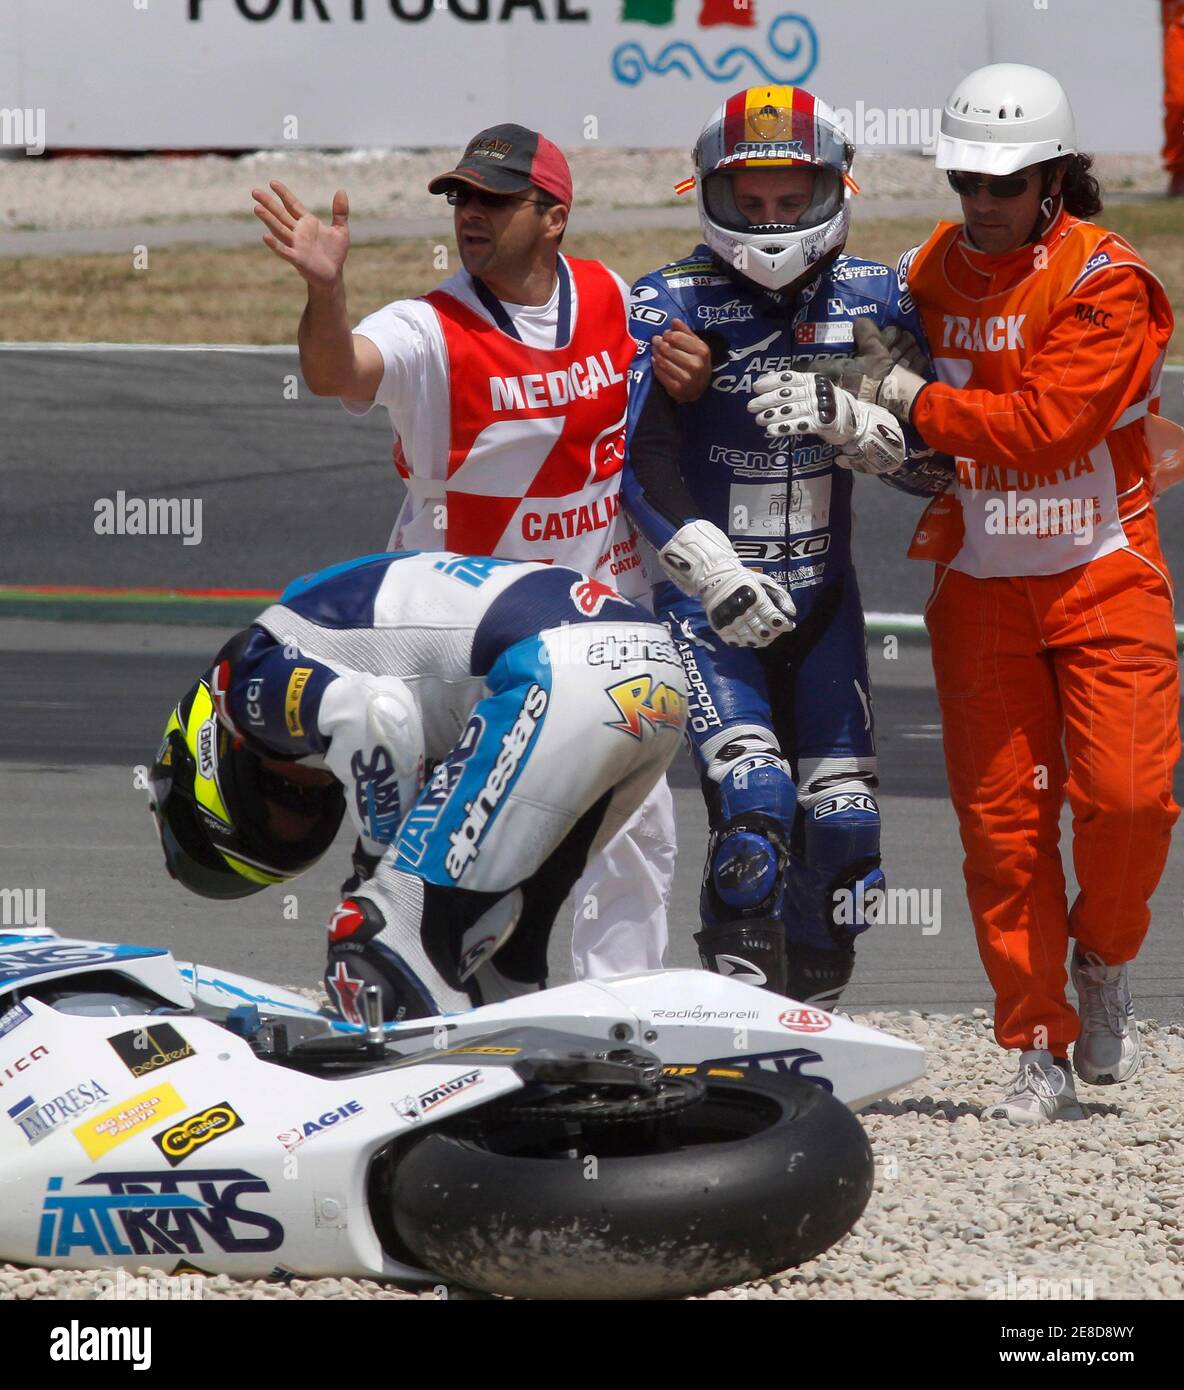 FTR Moto2 rider Alex Debon of Spain is assisted by medical staff next to  Suter Moto2 rider Roberto Rolfo of Italy after they were involved in a crash  with seven other riders